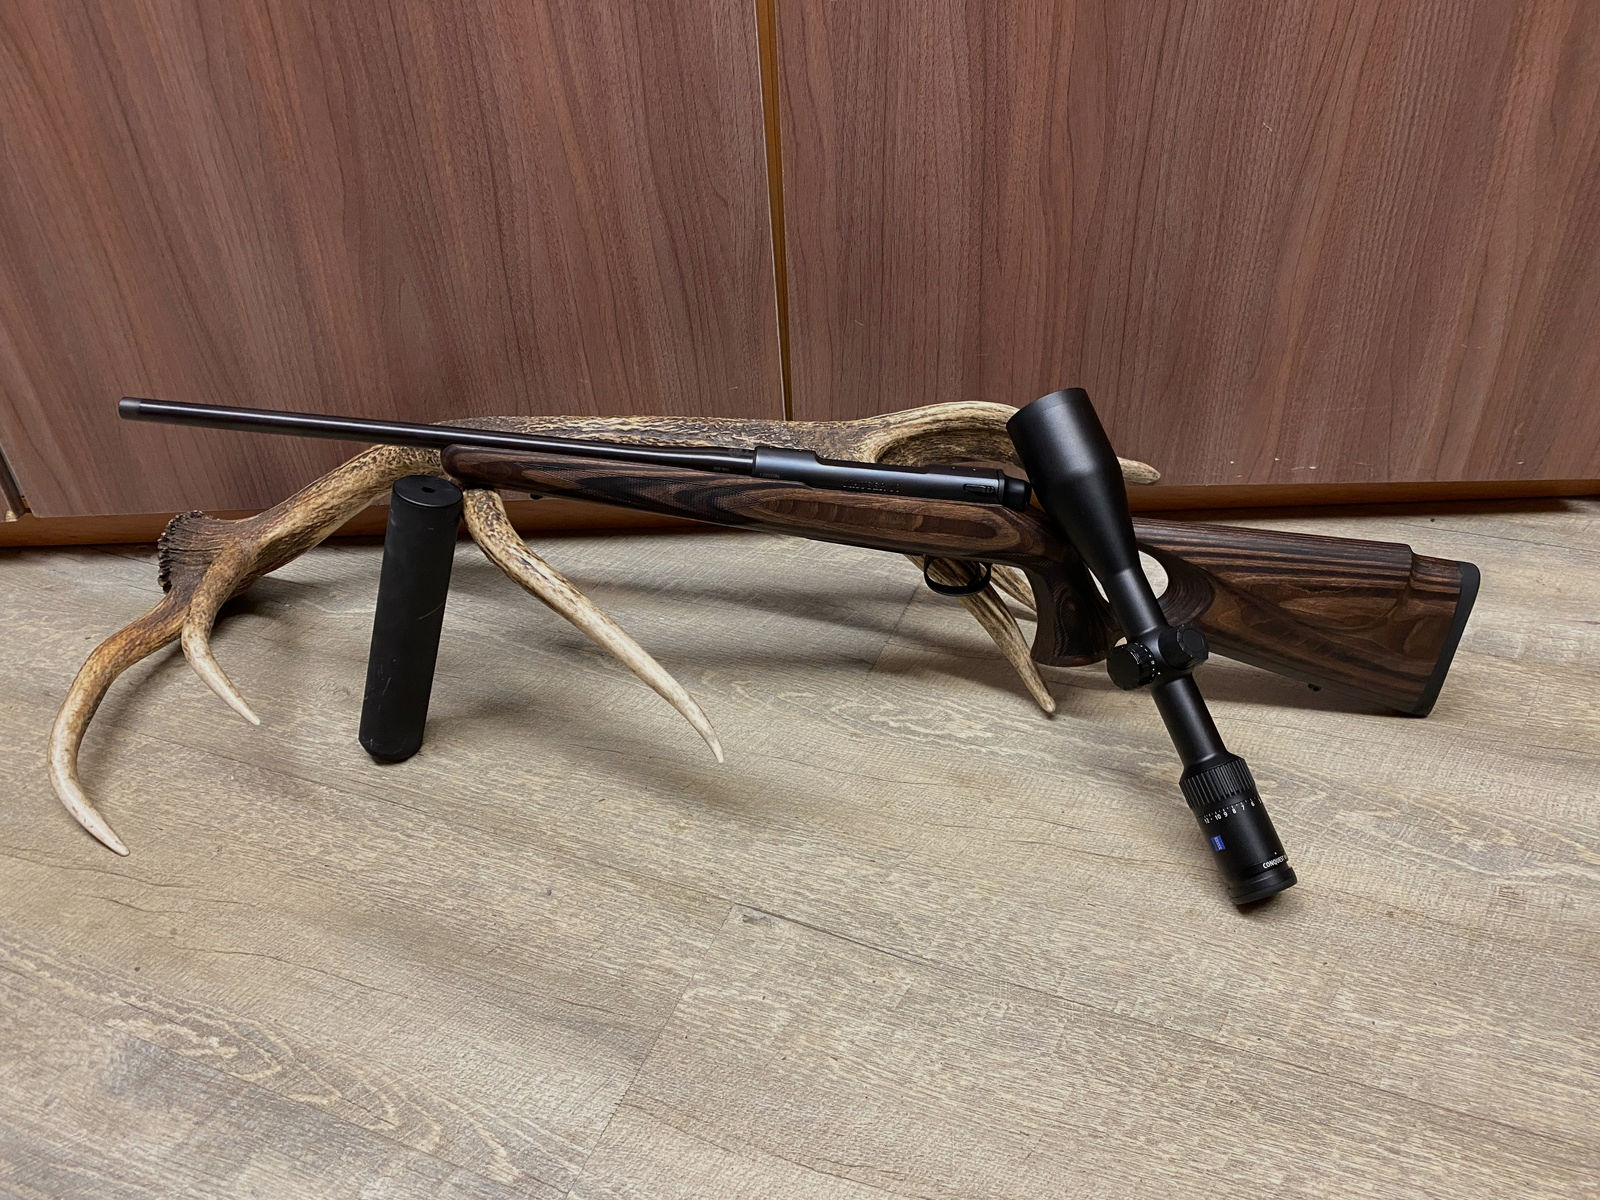 Mauser M18 Max Pure, mit Zeiss Conquest V4 3-12x56